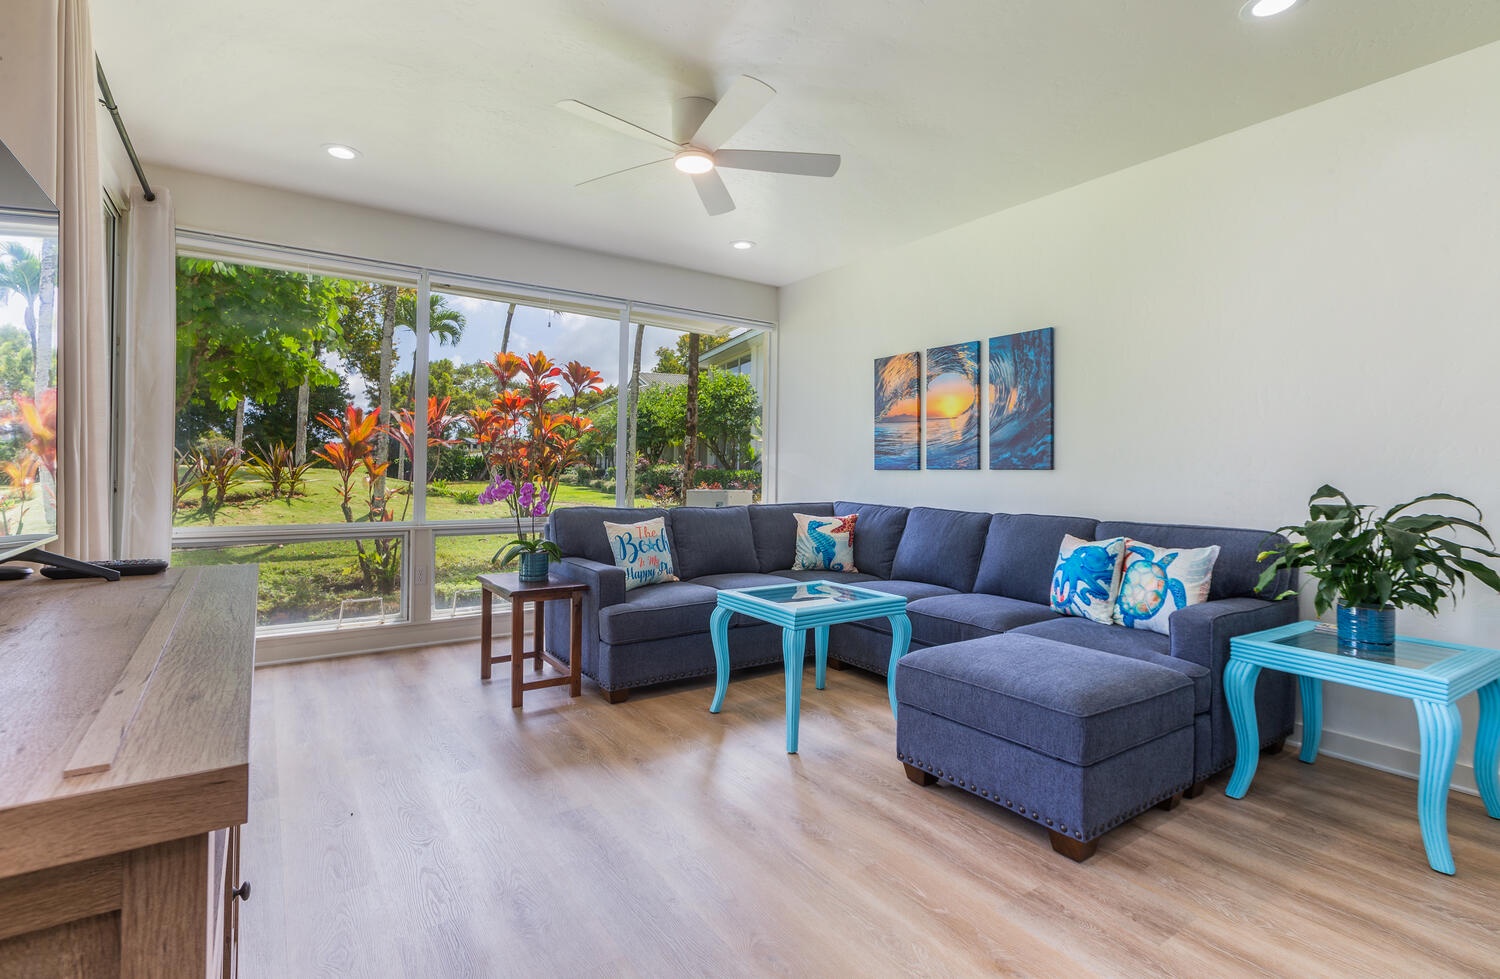 Princeville Vacation Rentals, Emmalani Court 414 - Easy access to the lanai and golf course views from the living area